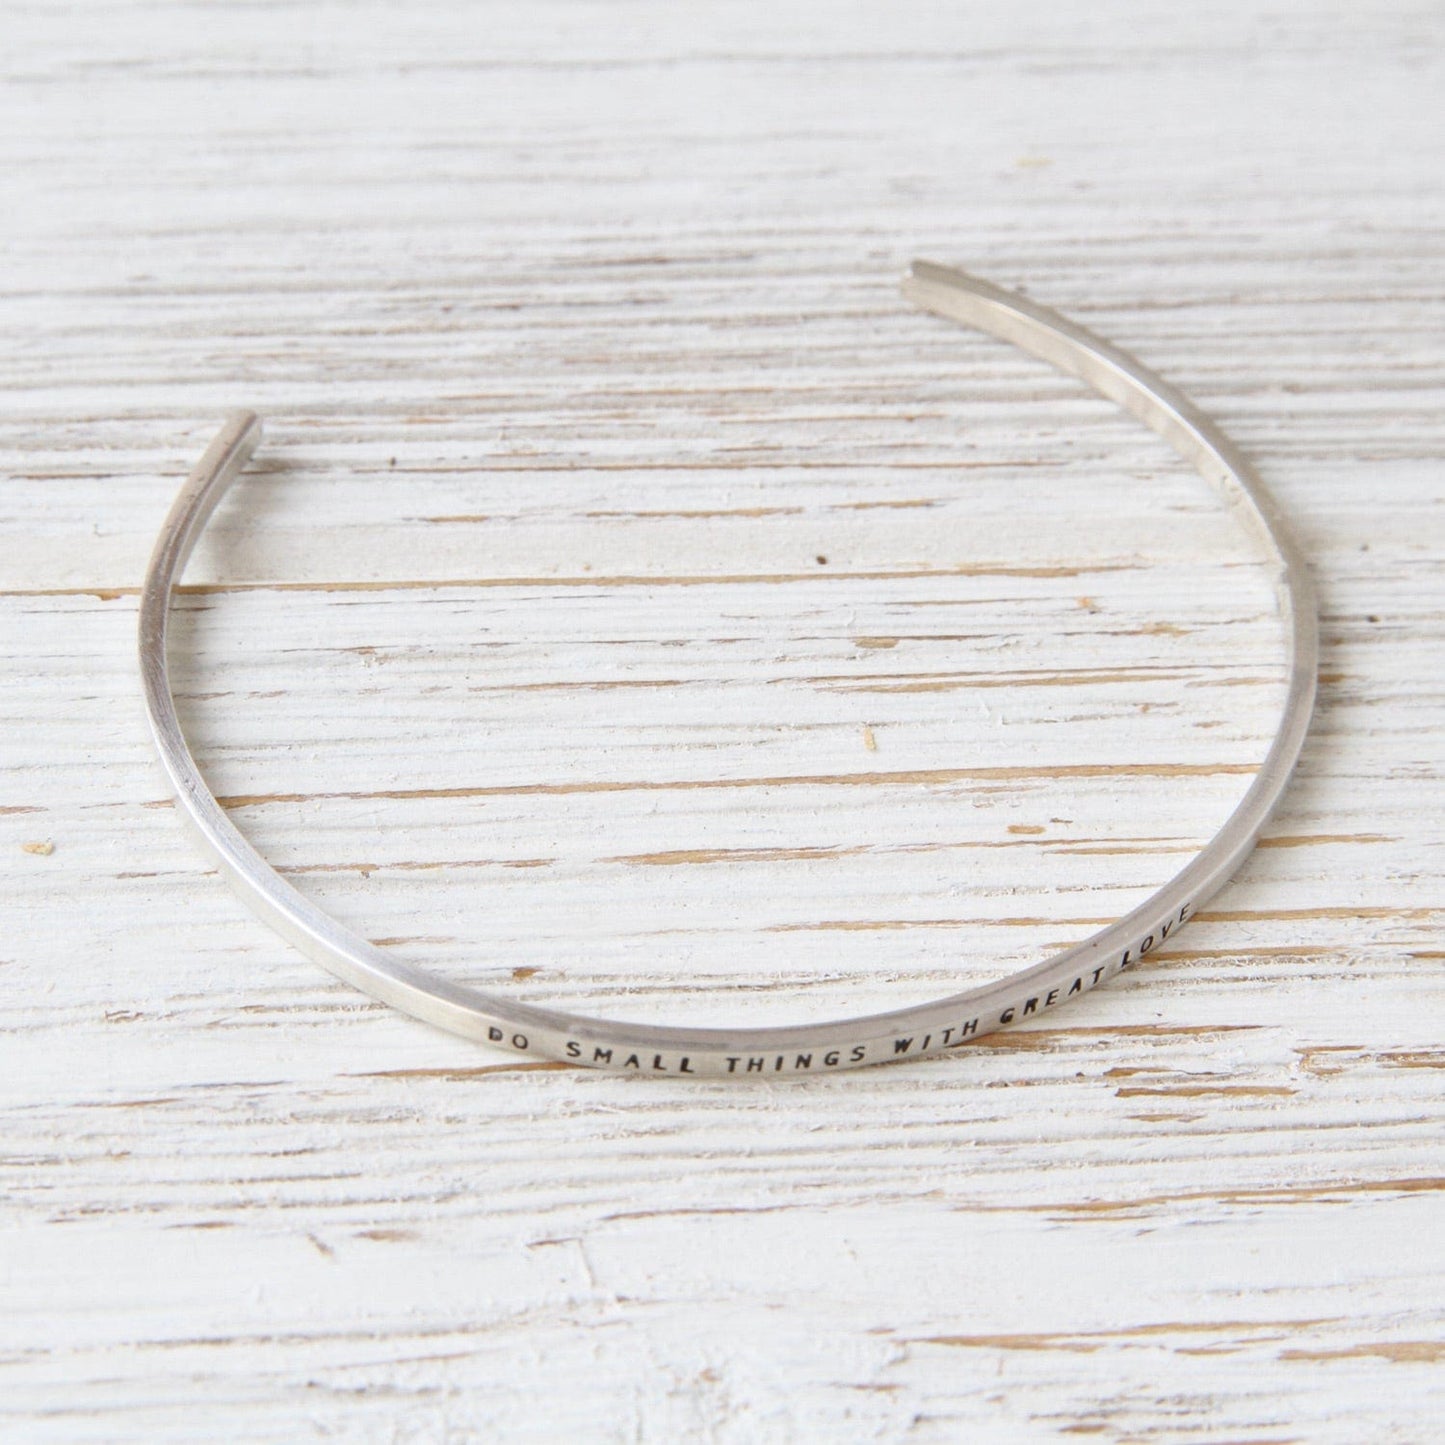 BRC Sterling Silver Cuff - "Do Small Things with Great Love"